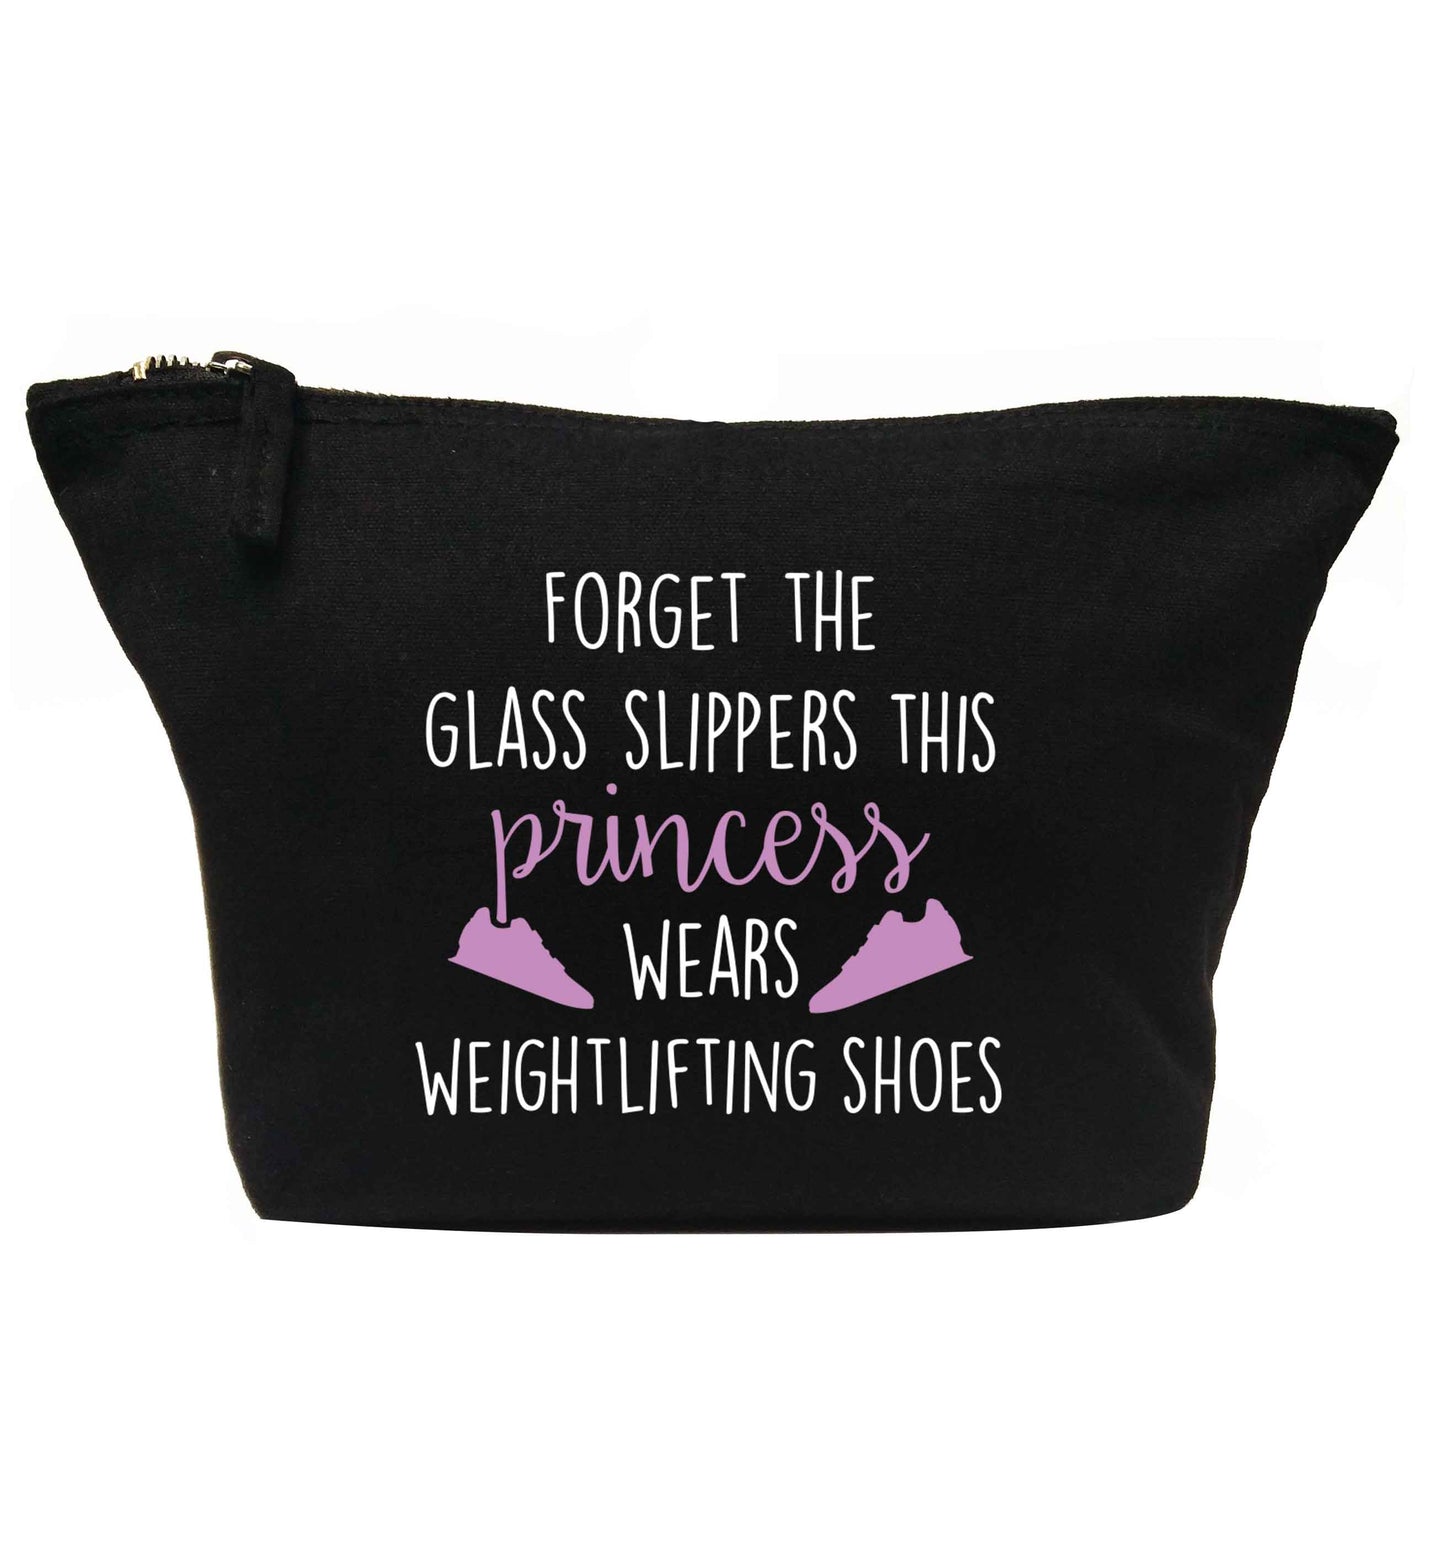 Forget the glass slippers this princess wears weightlifting shoes | makeup / wash bag